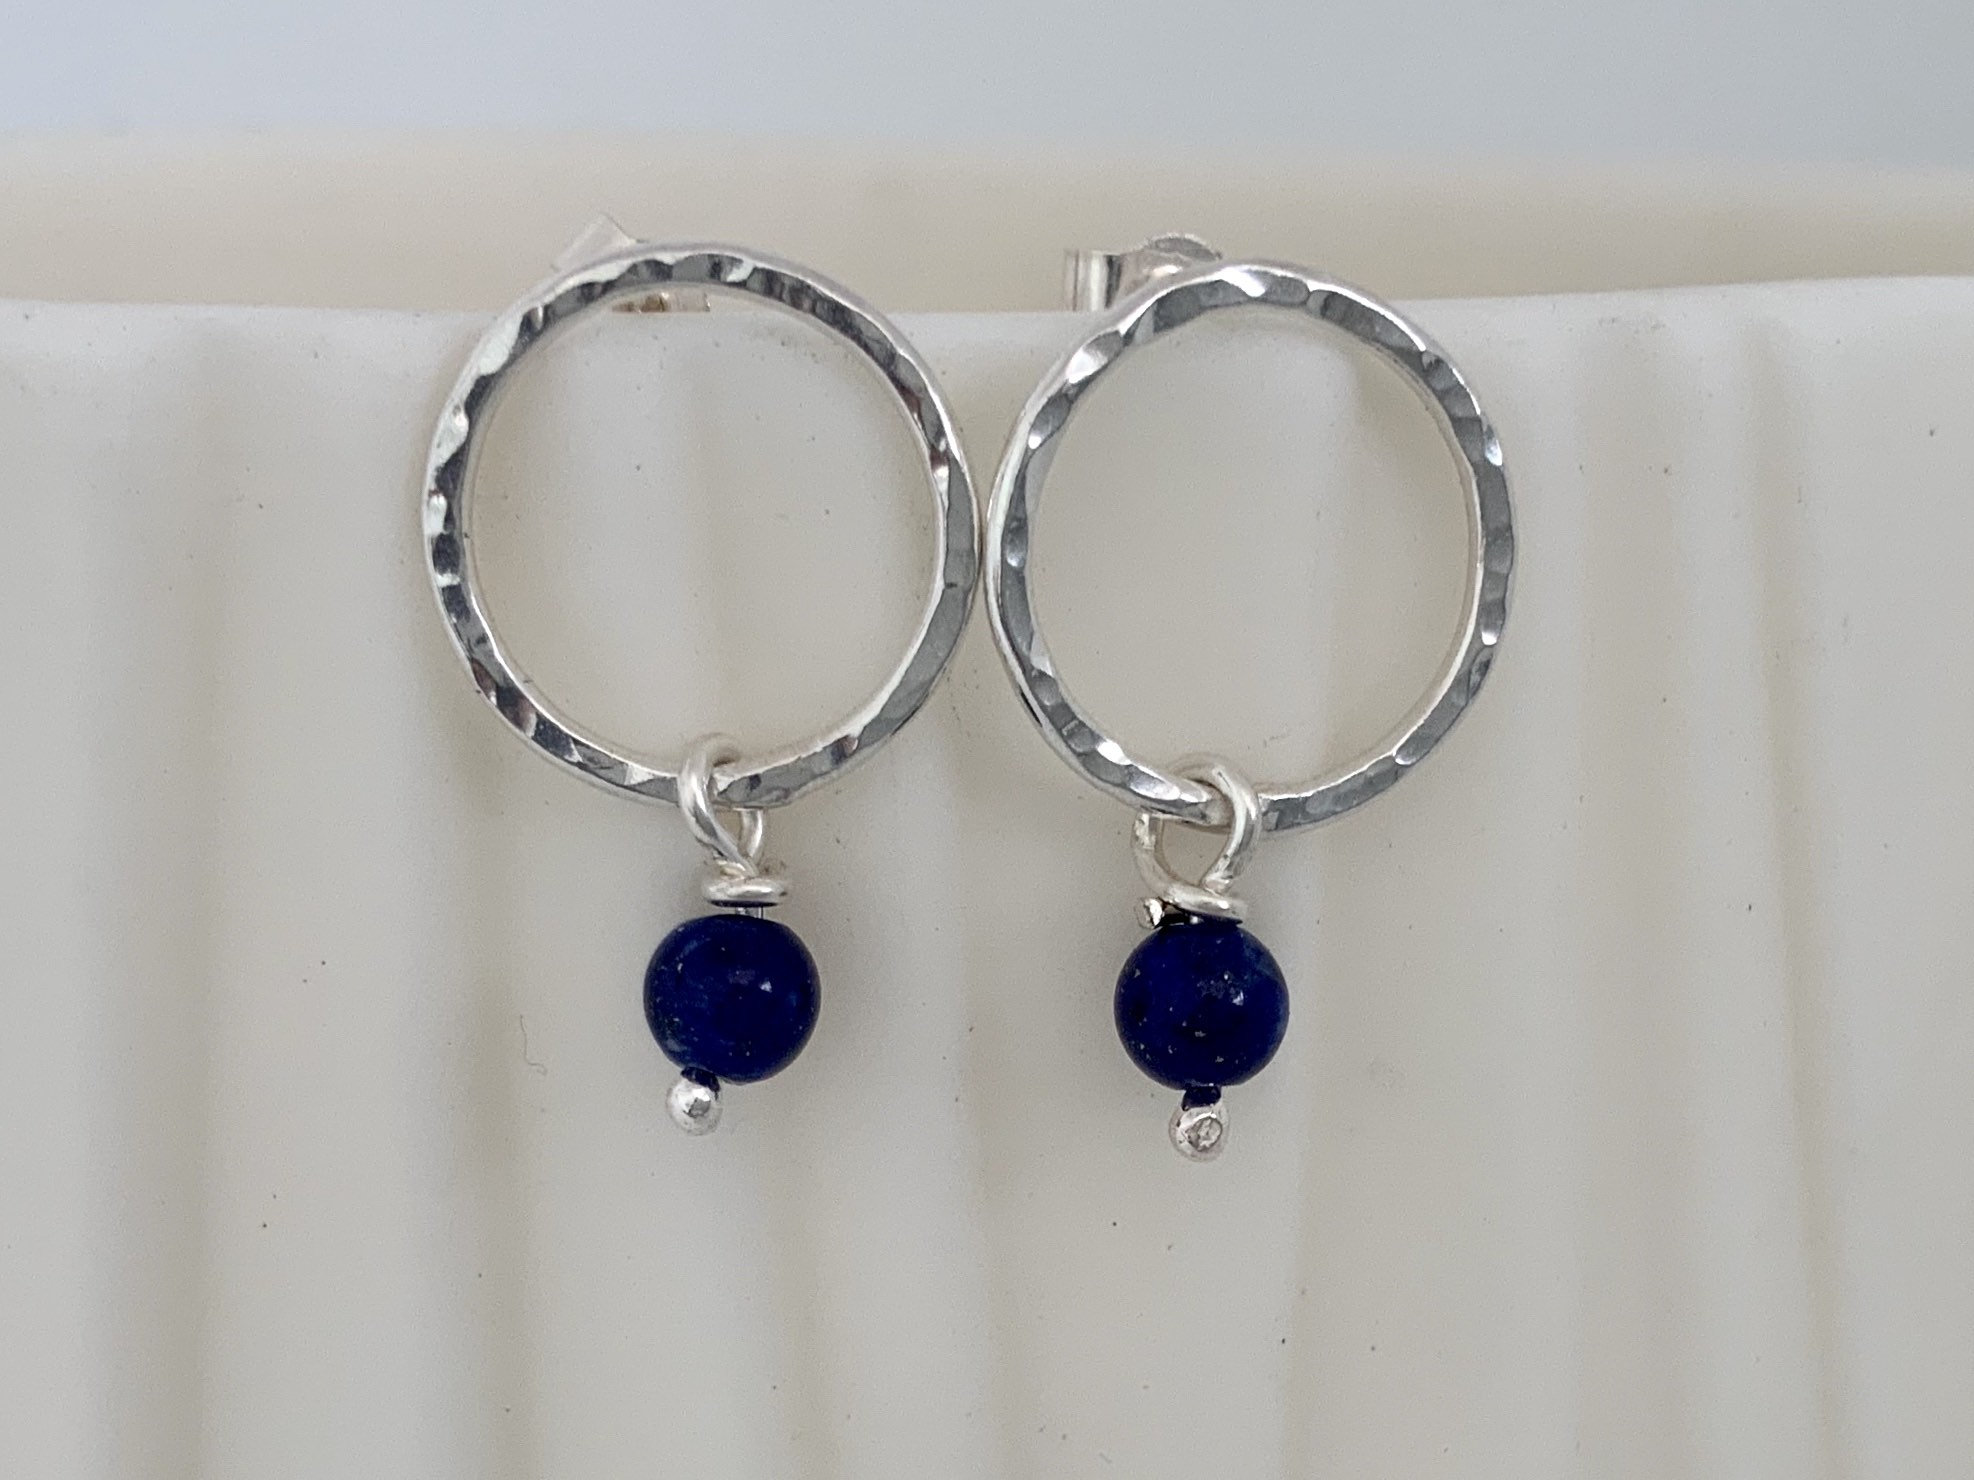 Silver Circle Stud Earrings With Lapis Lazuli Beads, Open Earrings, Hammered Silver Bright Blue